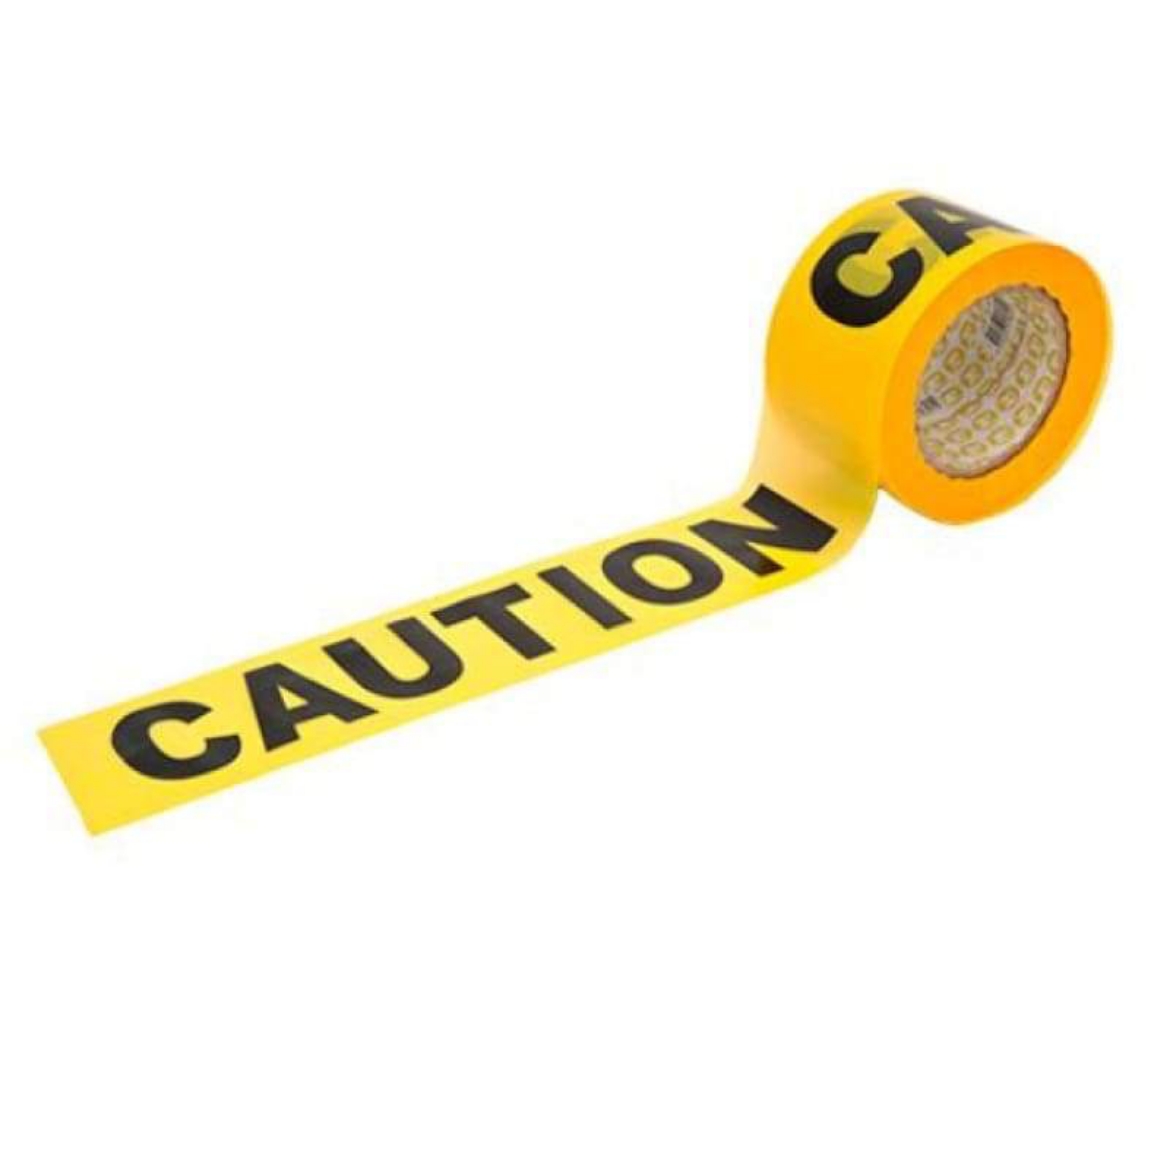 Picture of Frontier Caution Safety Tape 100m Yellow/Black